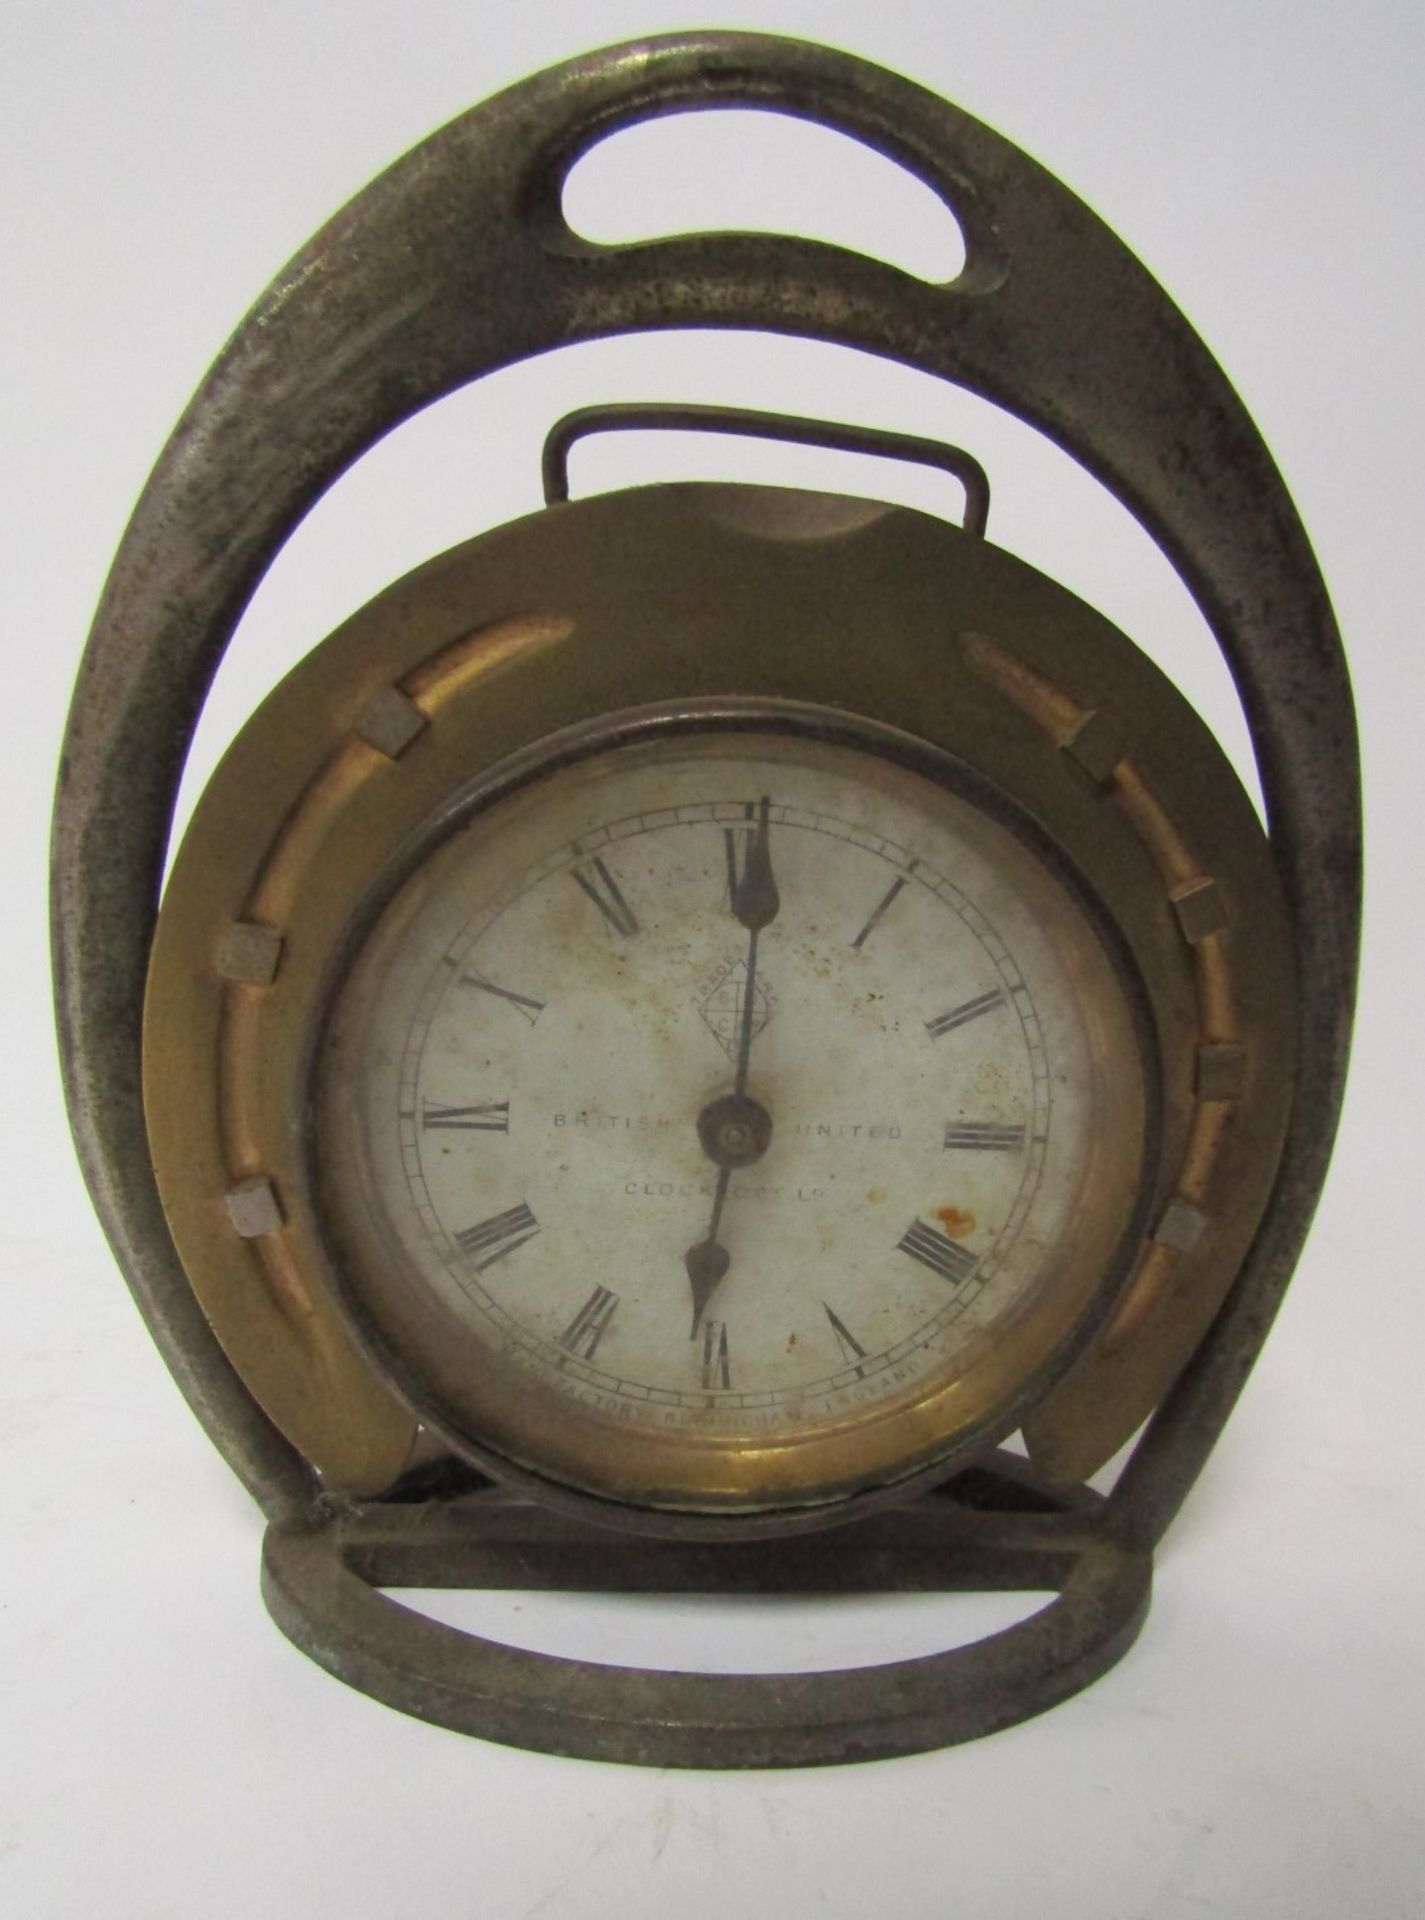 Three novelty clock stands, formed from a stirrup with horseshoe mount, one including clock face sta - Image 3 of 5